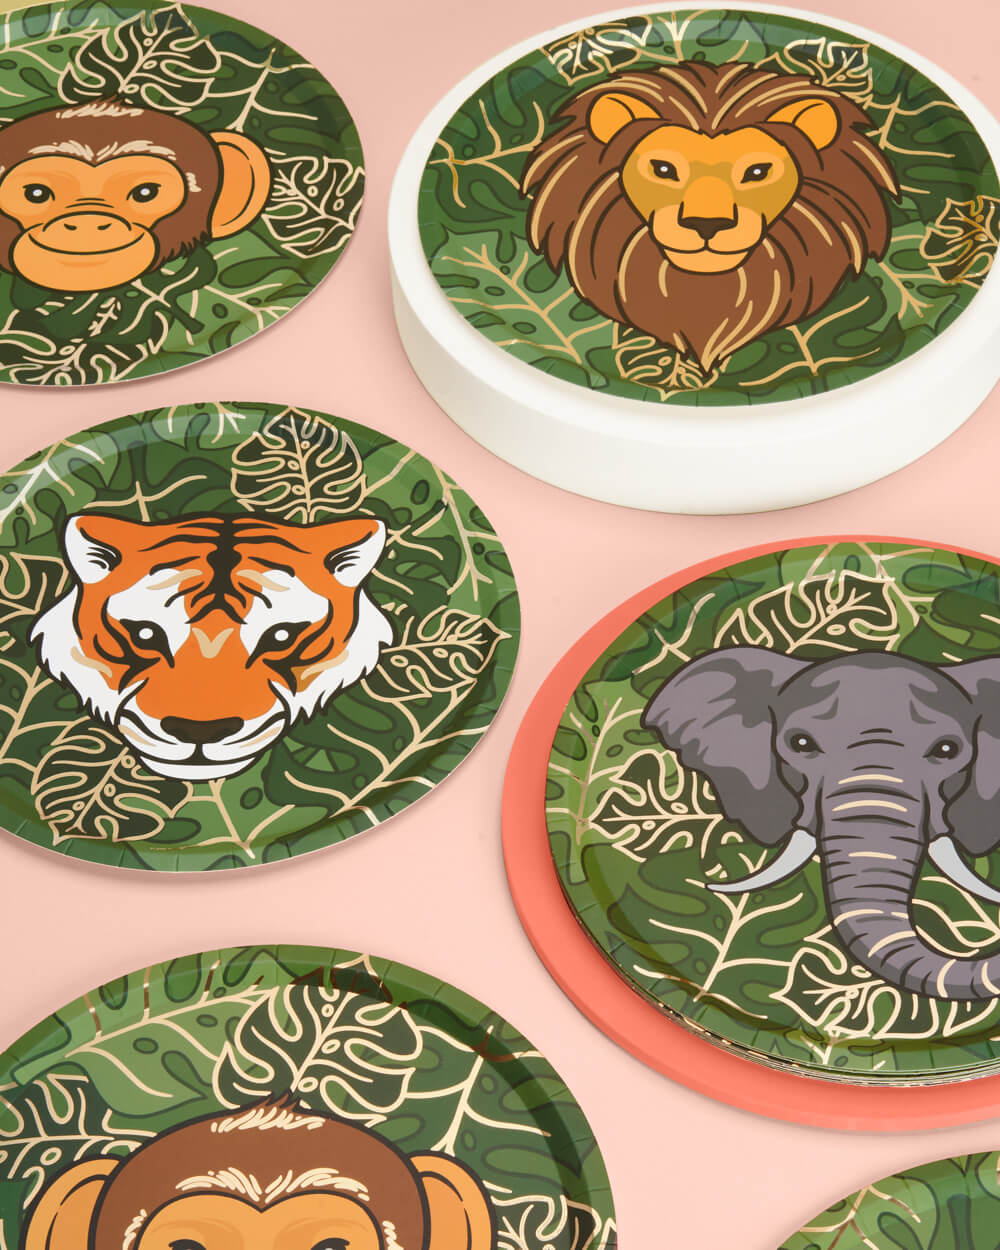 Party Animal Plates - 24 paper plates